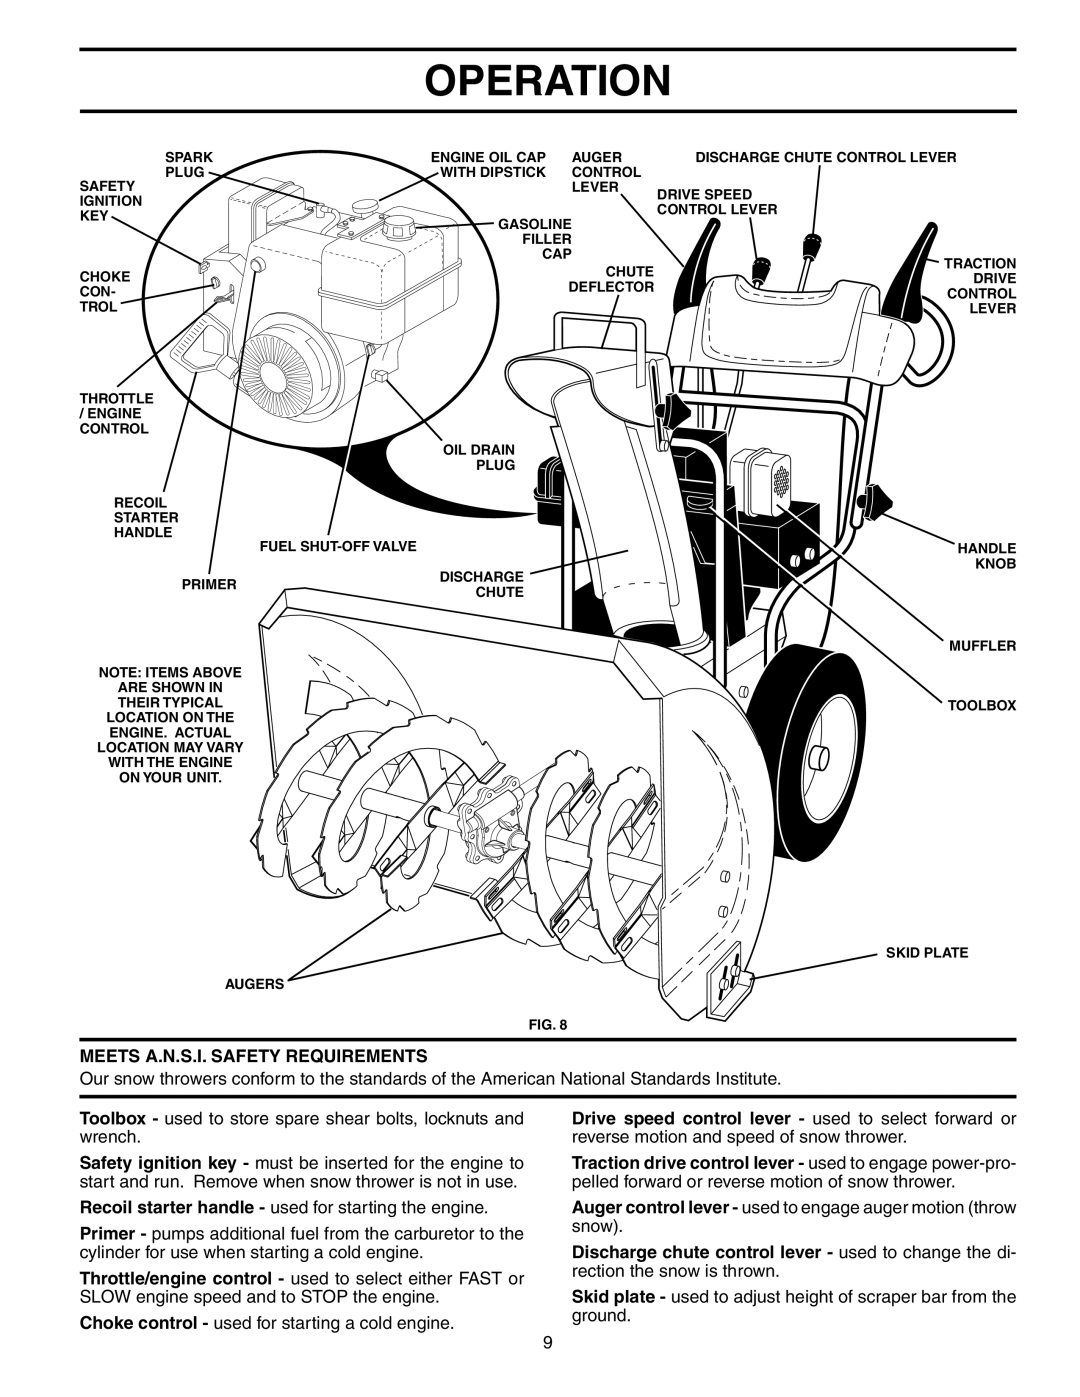 Husqvarna 524ST owner manual Operation, Meets A.N.S.I. Safety Requirements 